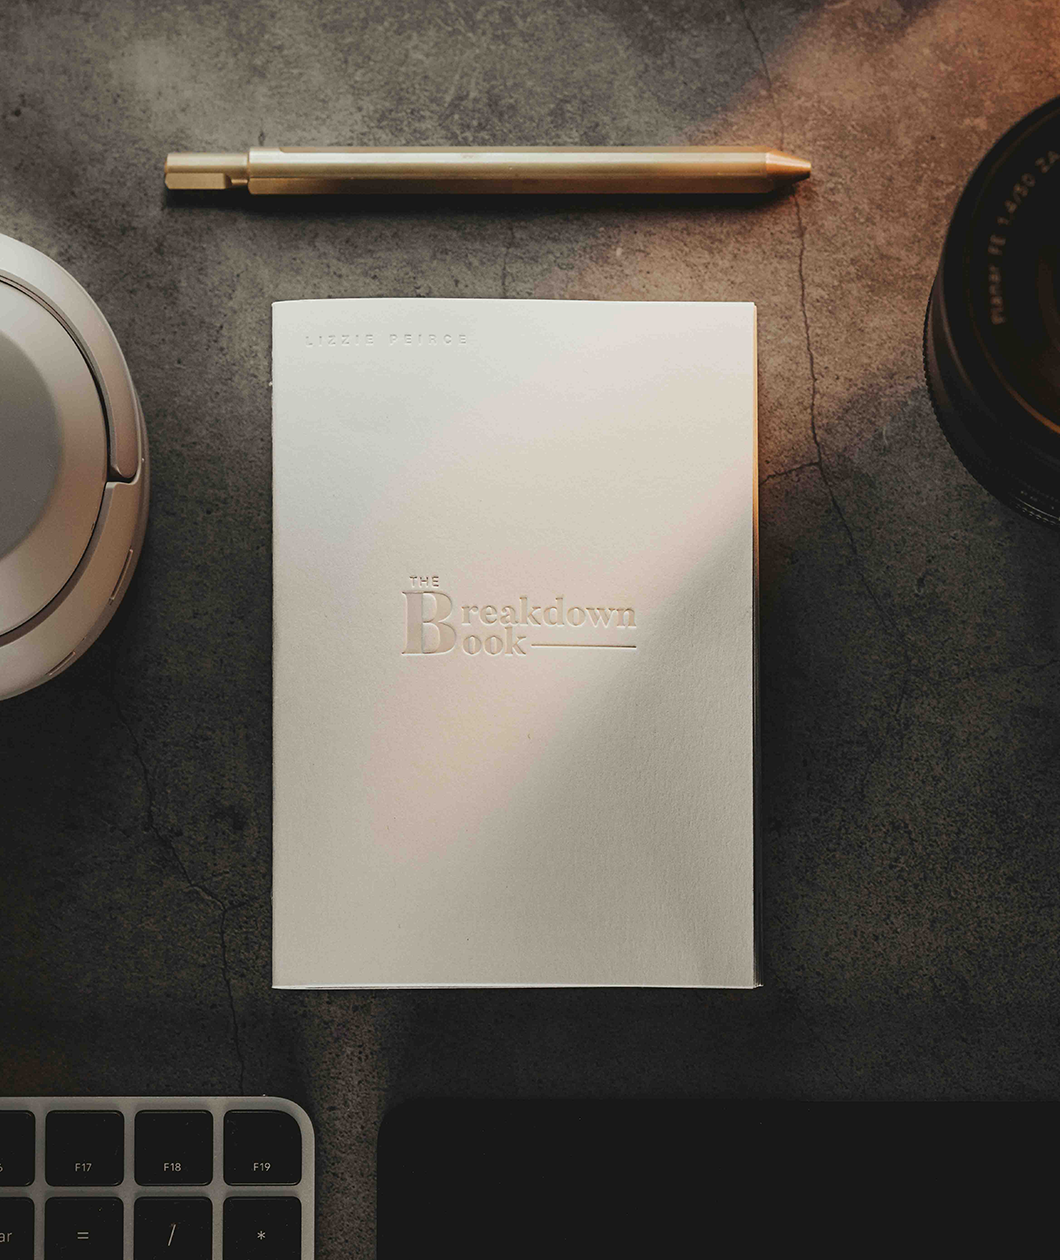 A white notebook with the text "The Breakdown Book" on the front from Lizzie Peirce. 